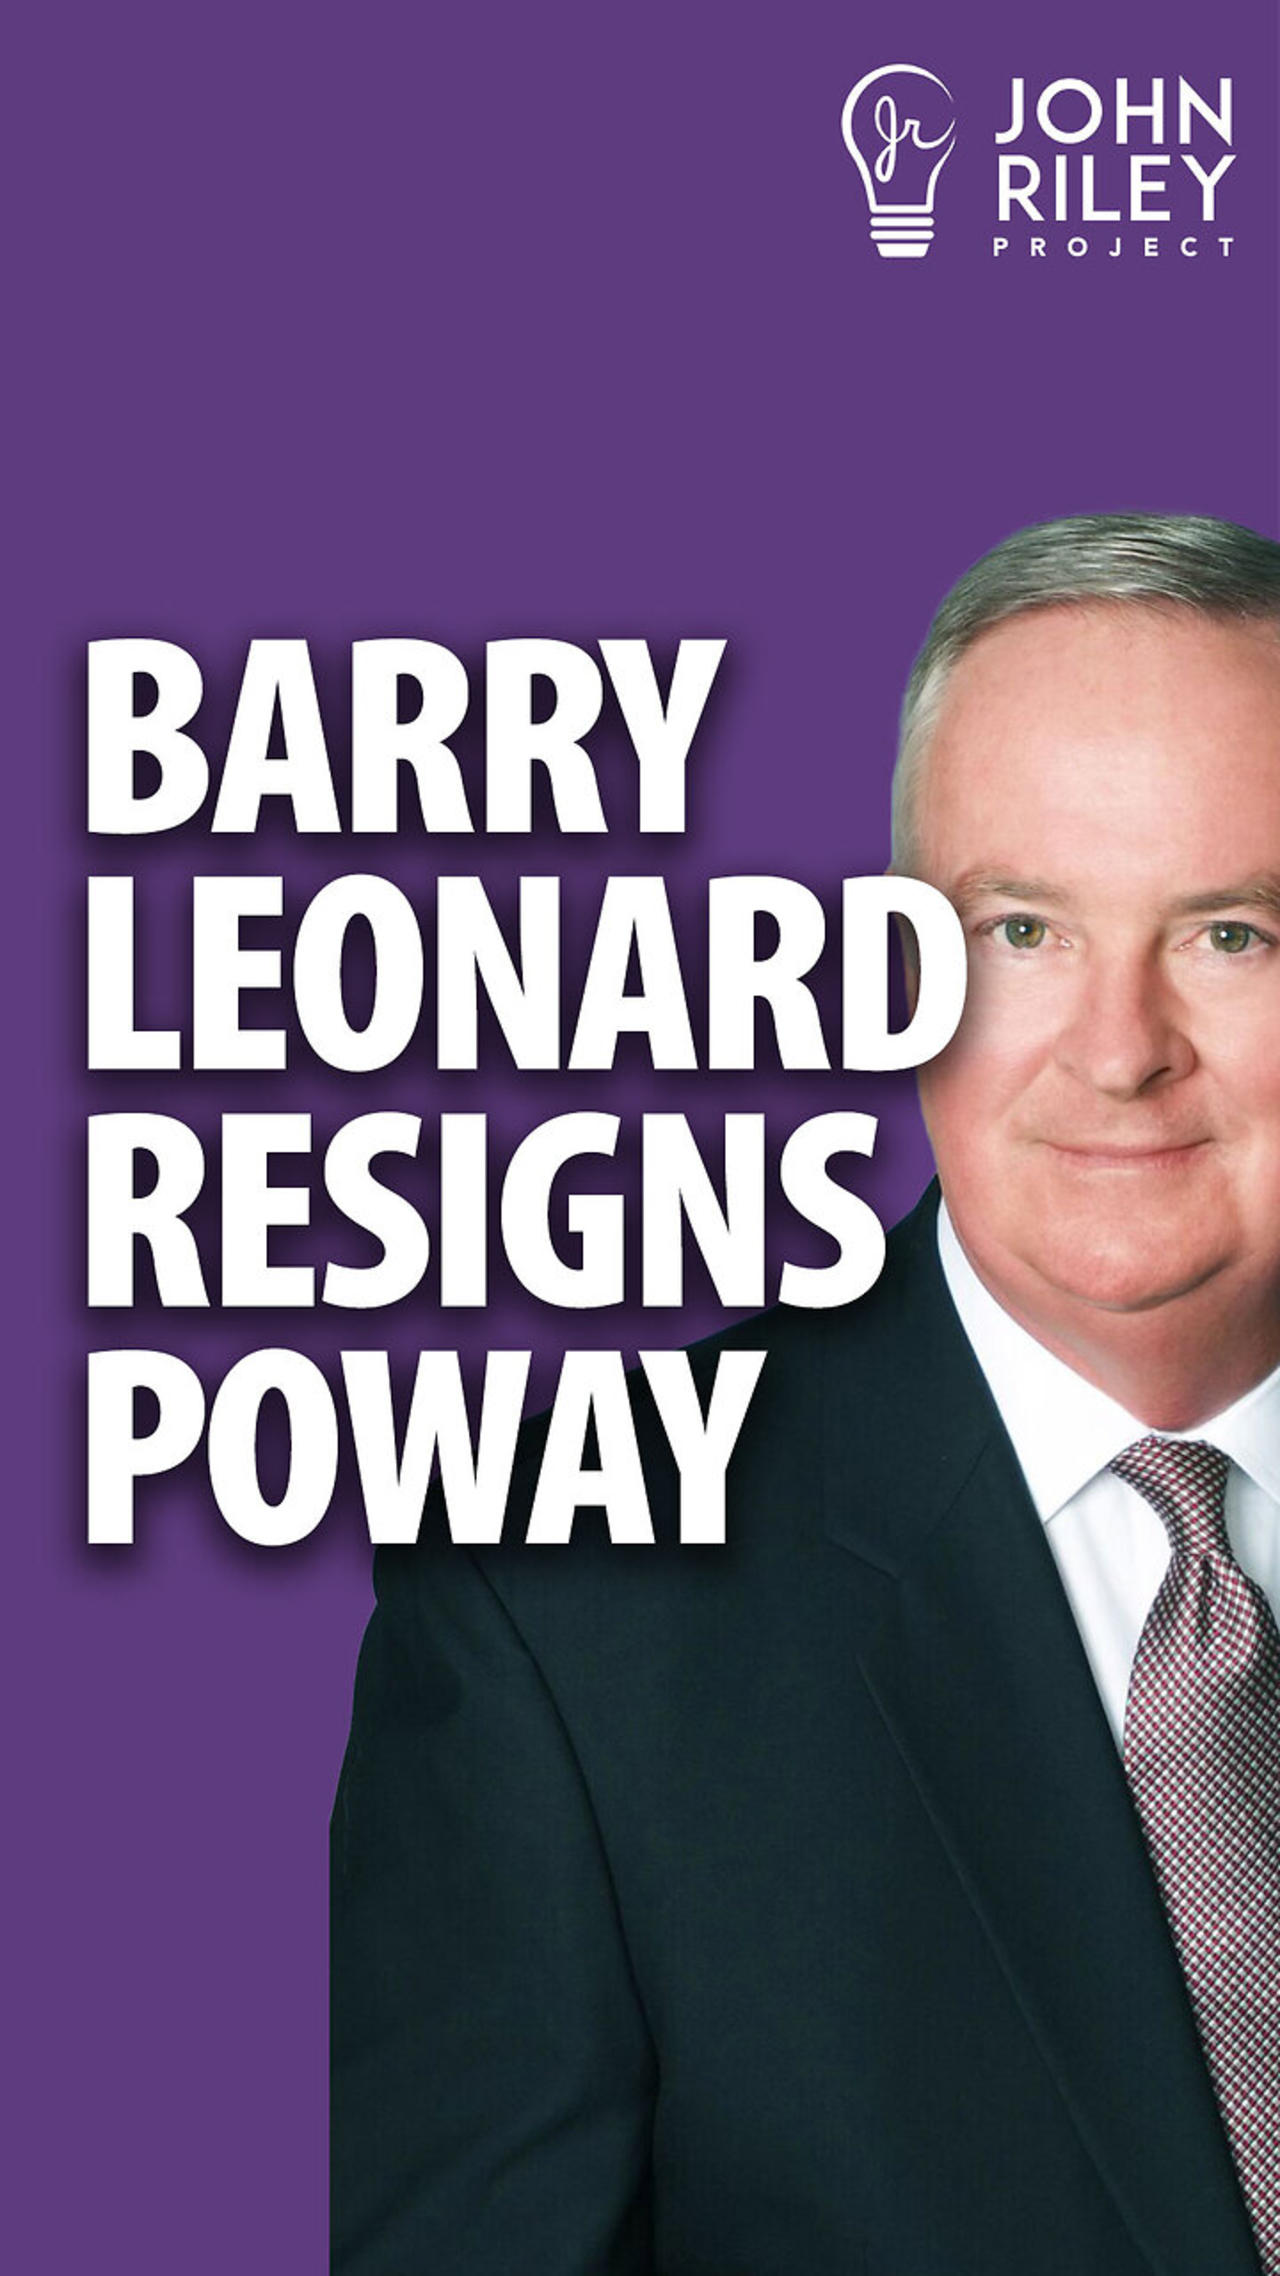 Poway Councilman Barry Leonard resigns. How will they replace him?